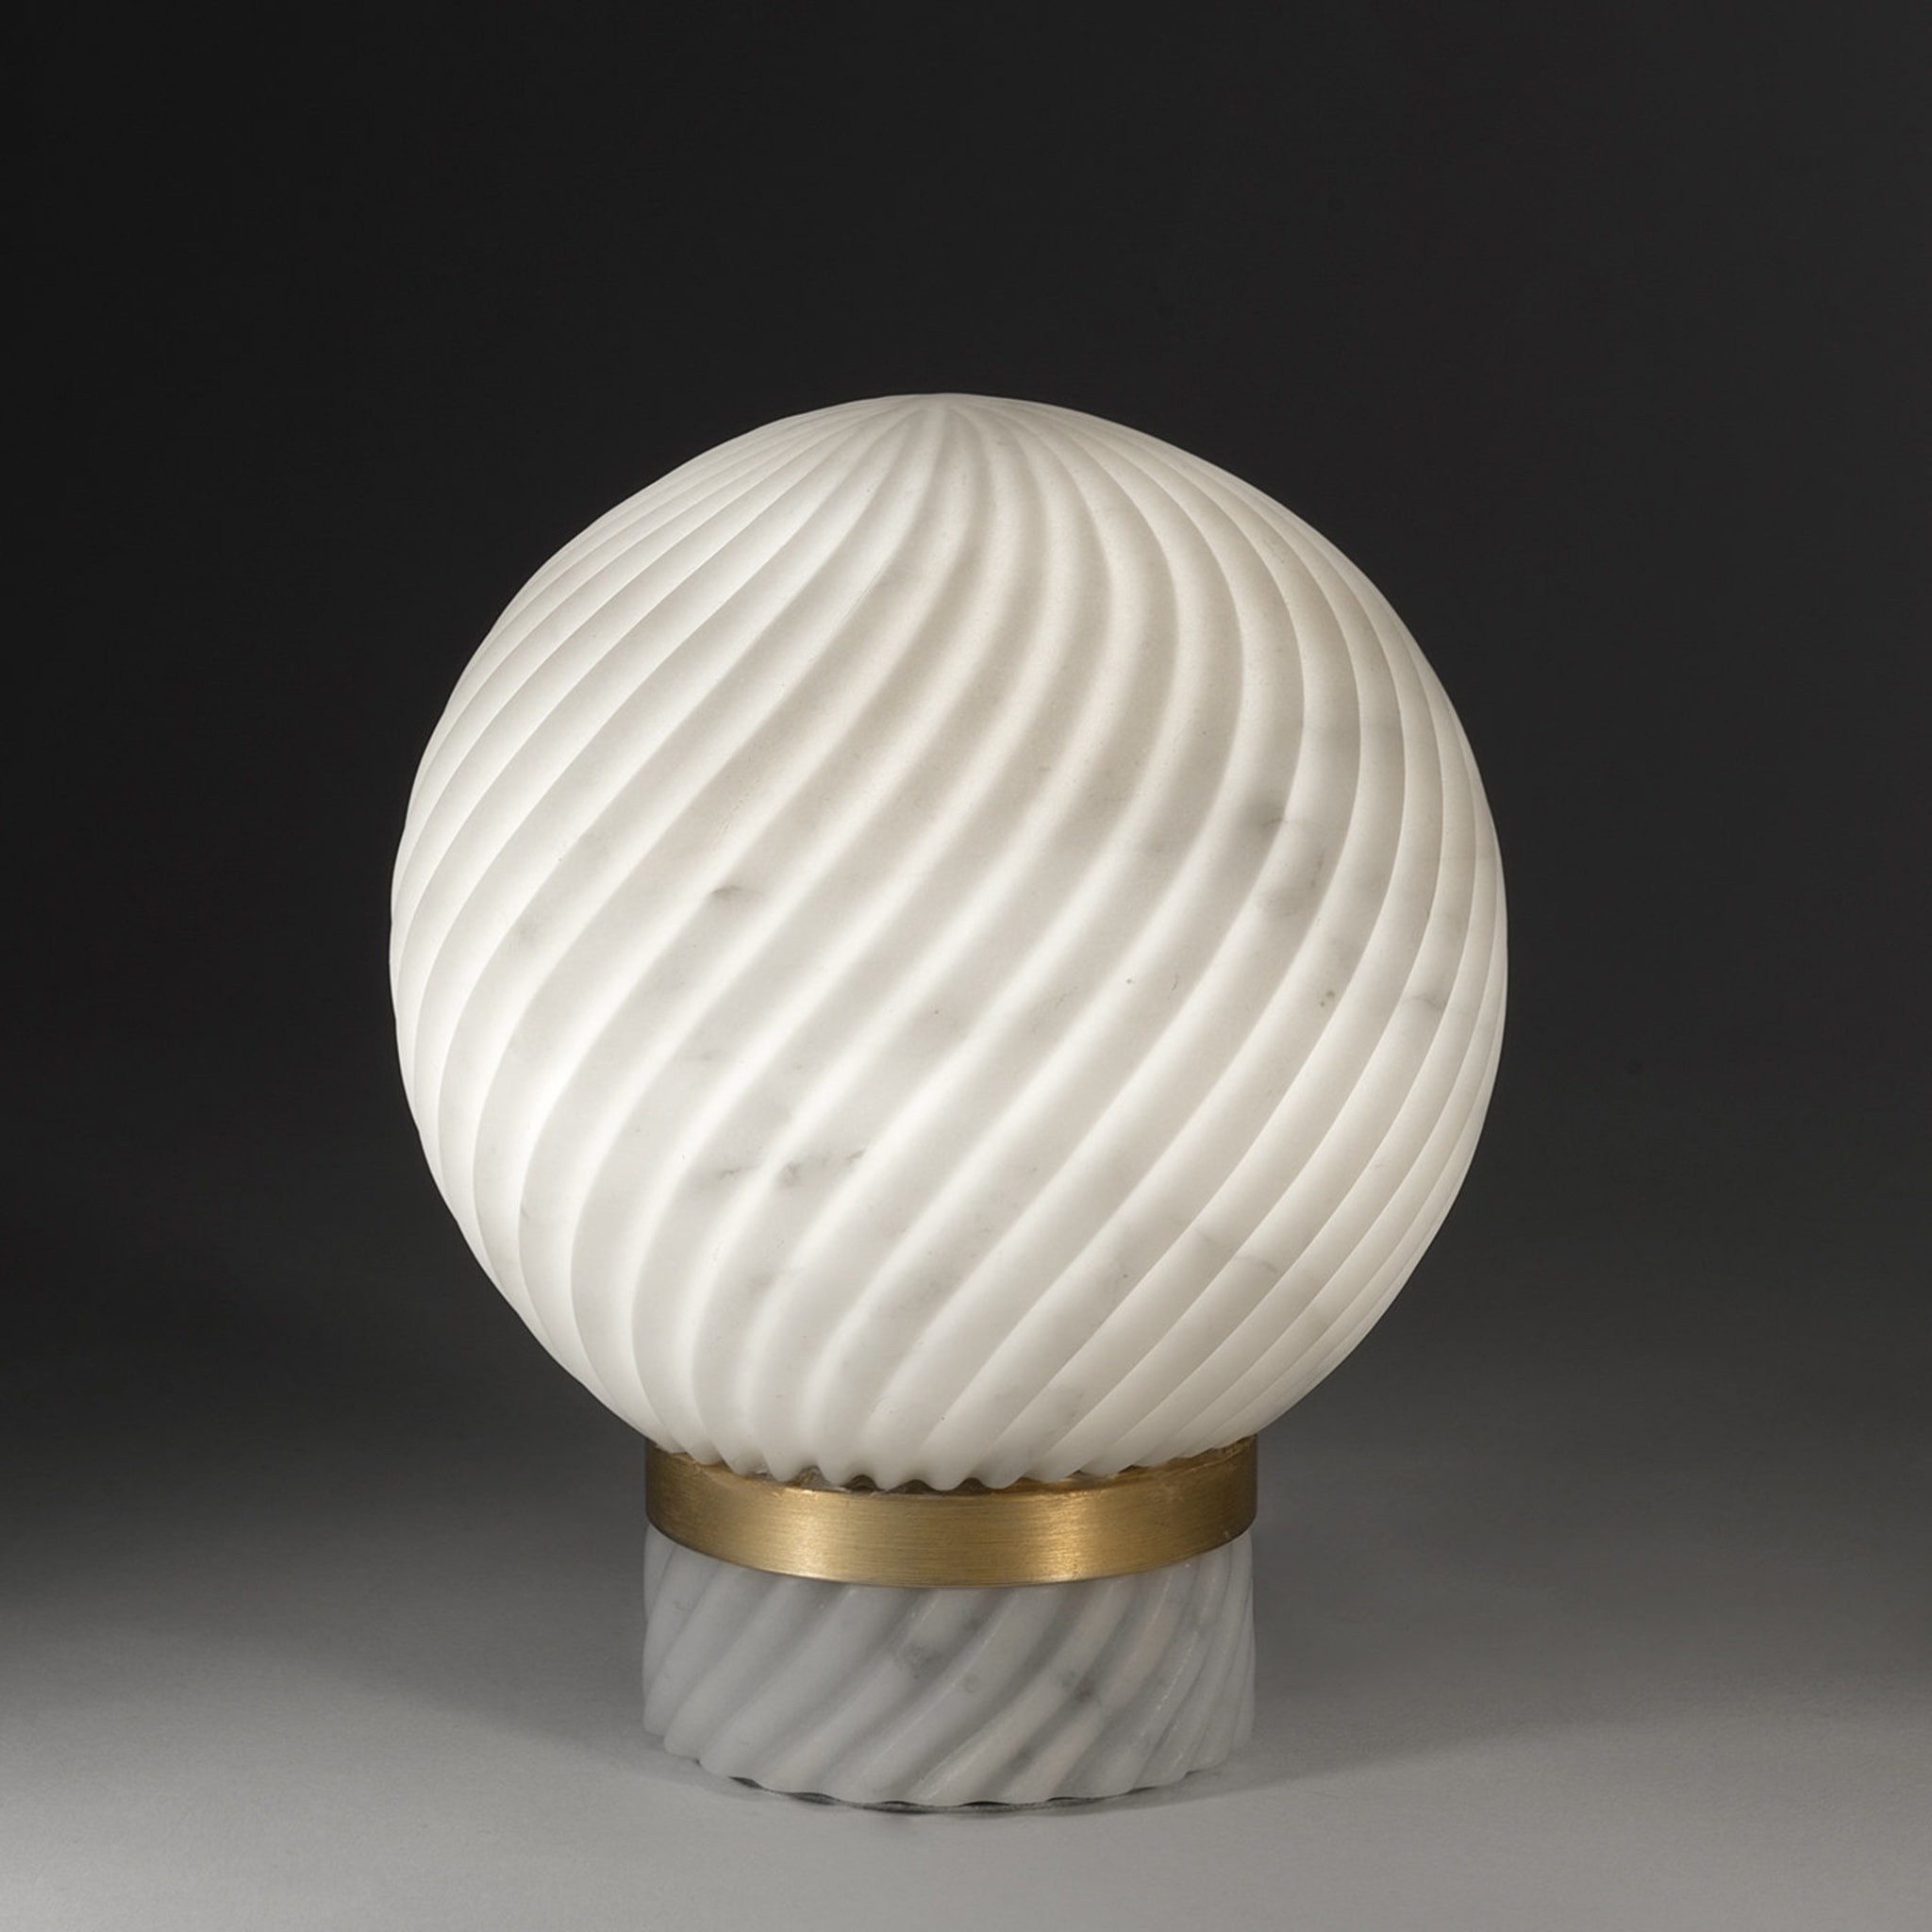 Victoria Table Lamp by Bethan Gray - Alternative view 2